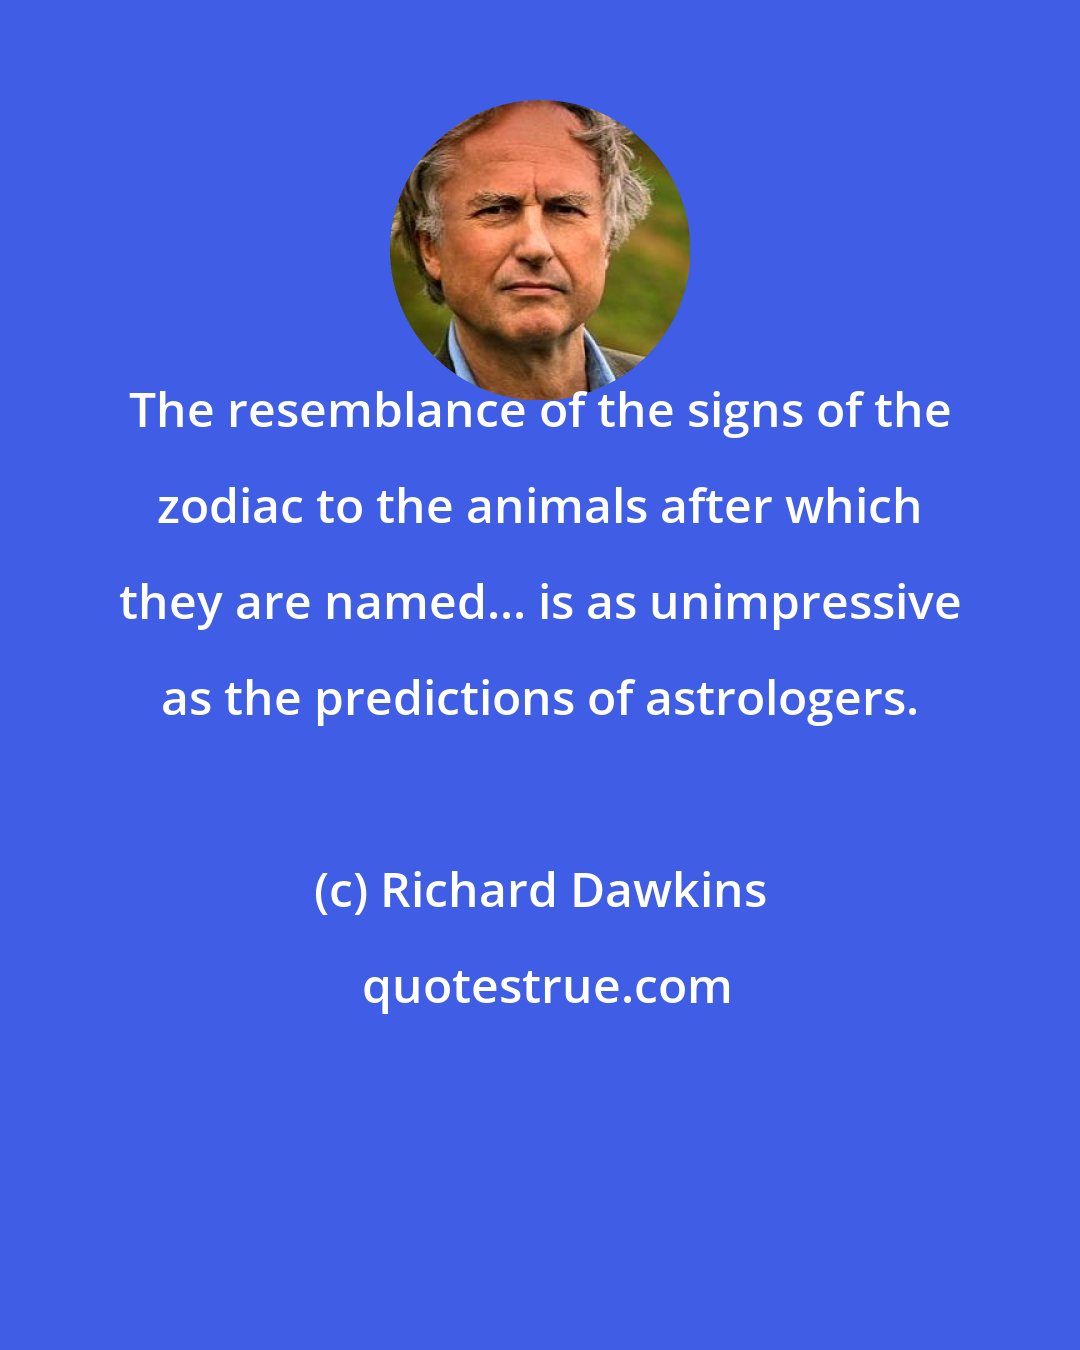 Richard Dawkins: The resemblance of the signs of the zodiac to the animals after which they are named... is as unimpressive as the predictions of astrologers.